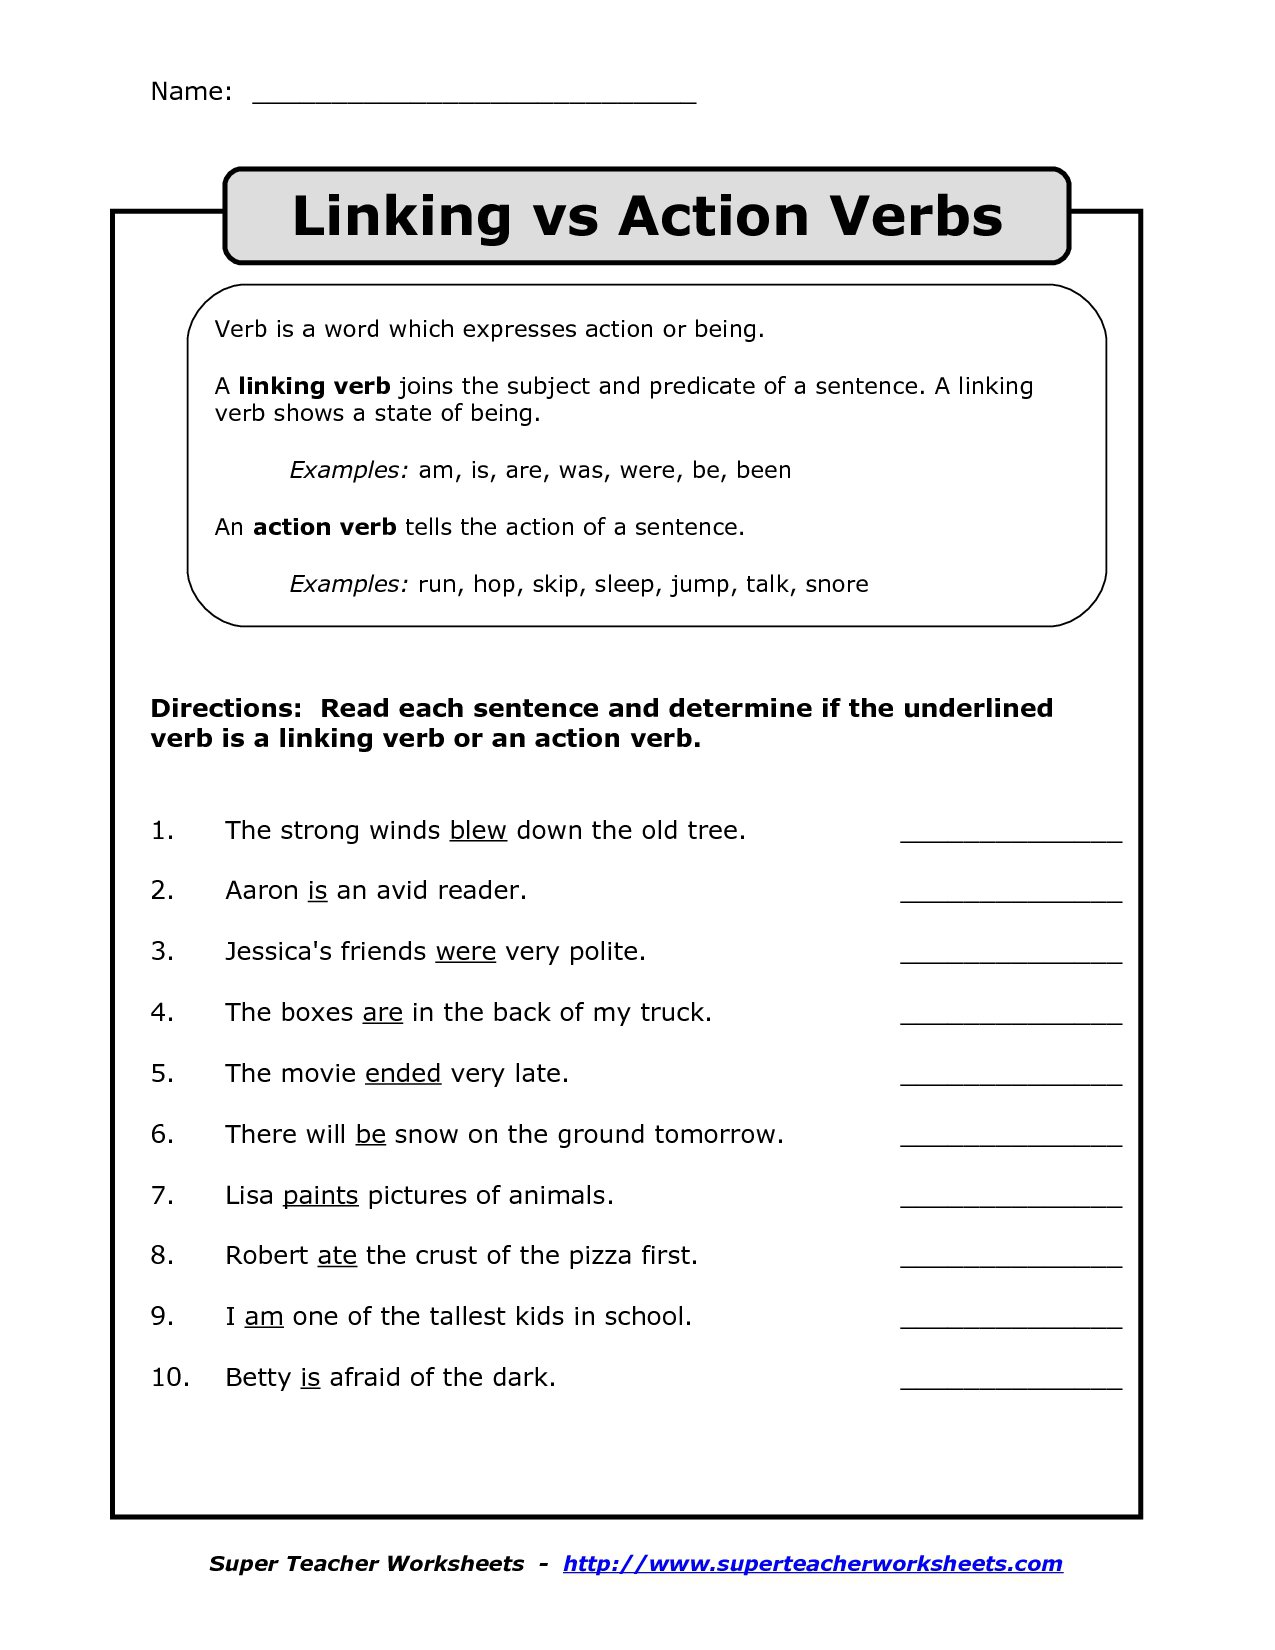 Action Linking Verb Worksheet The Best Worksheets Image Collection